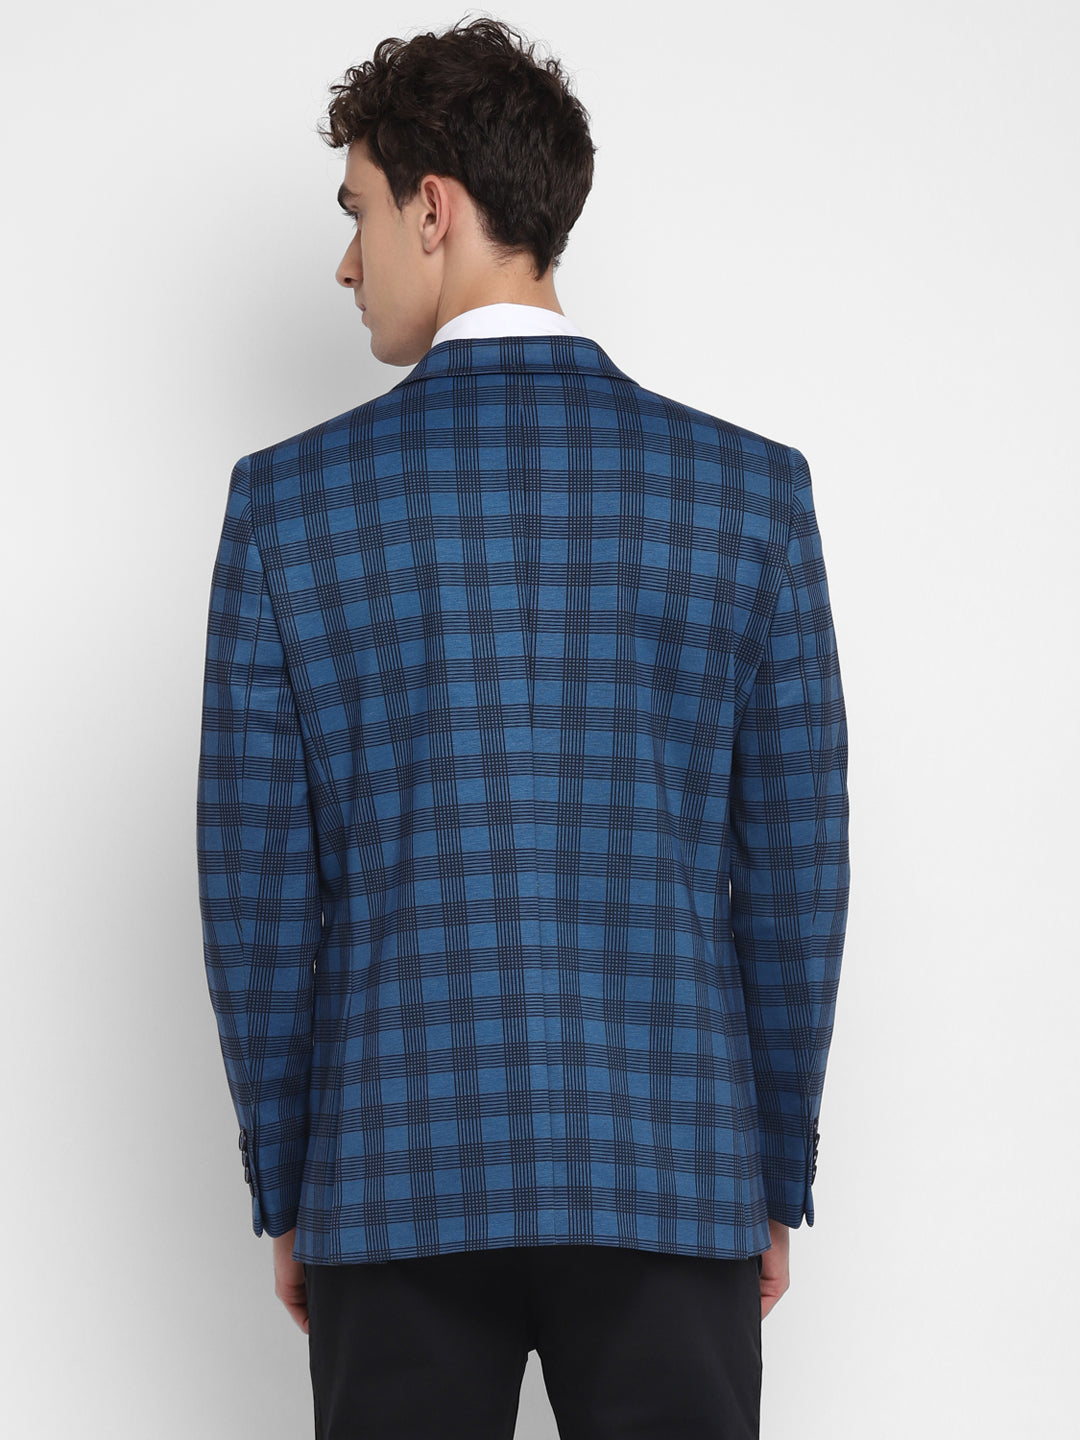 Knitted Blue Checkered Regular Fit Full Sleeve Casual Blazer